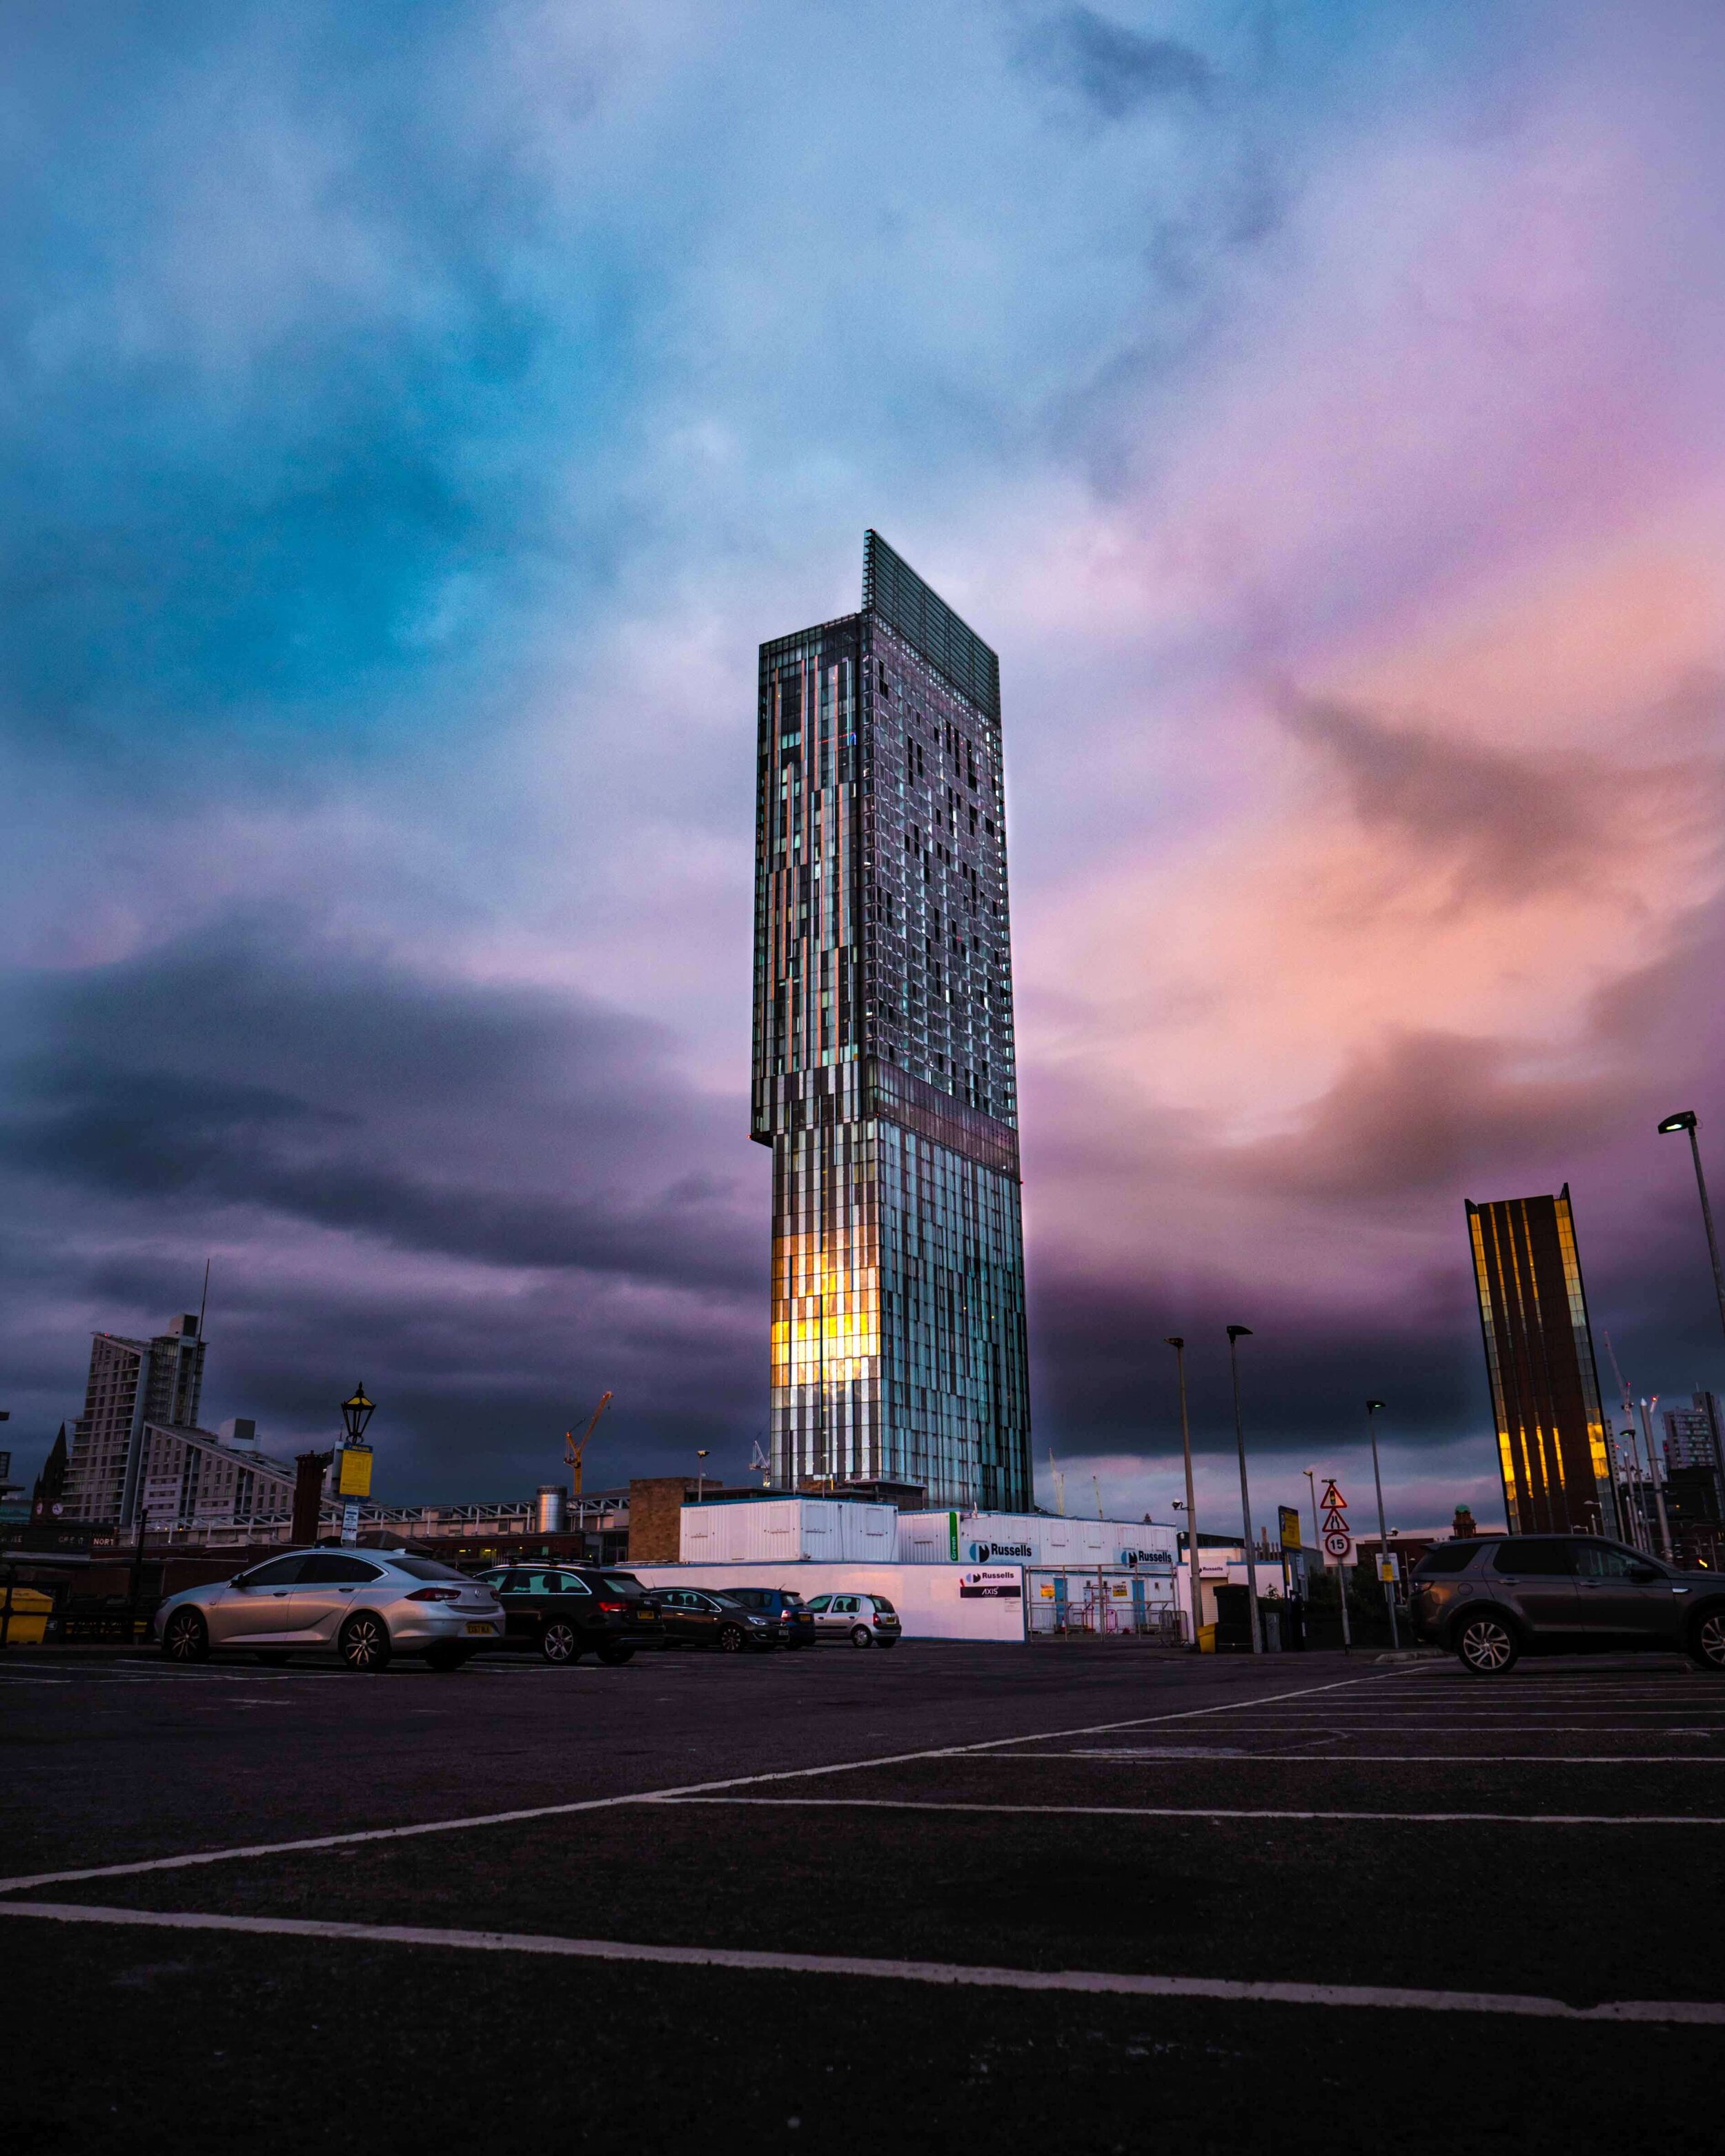 The Hilton Manchester, free stock photography.jpg